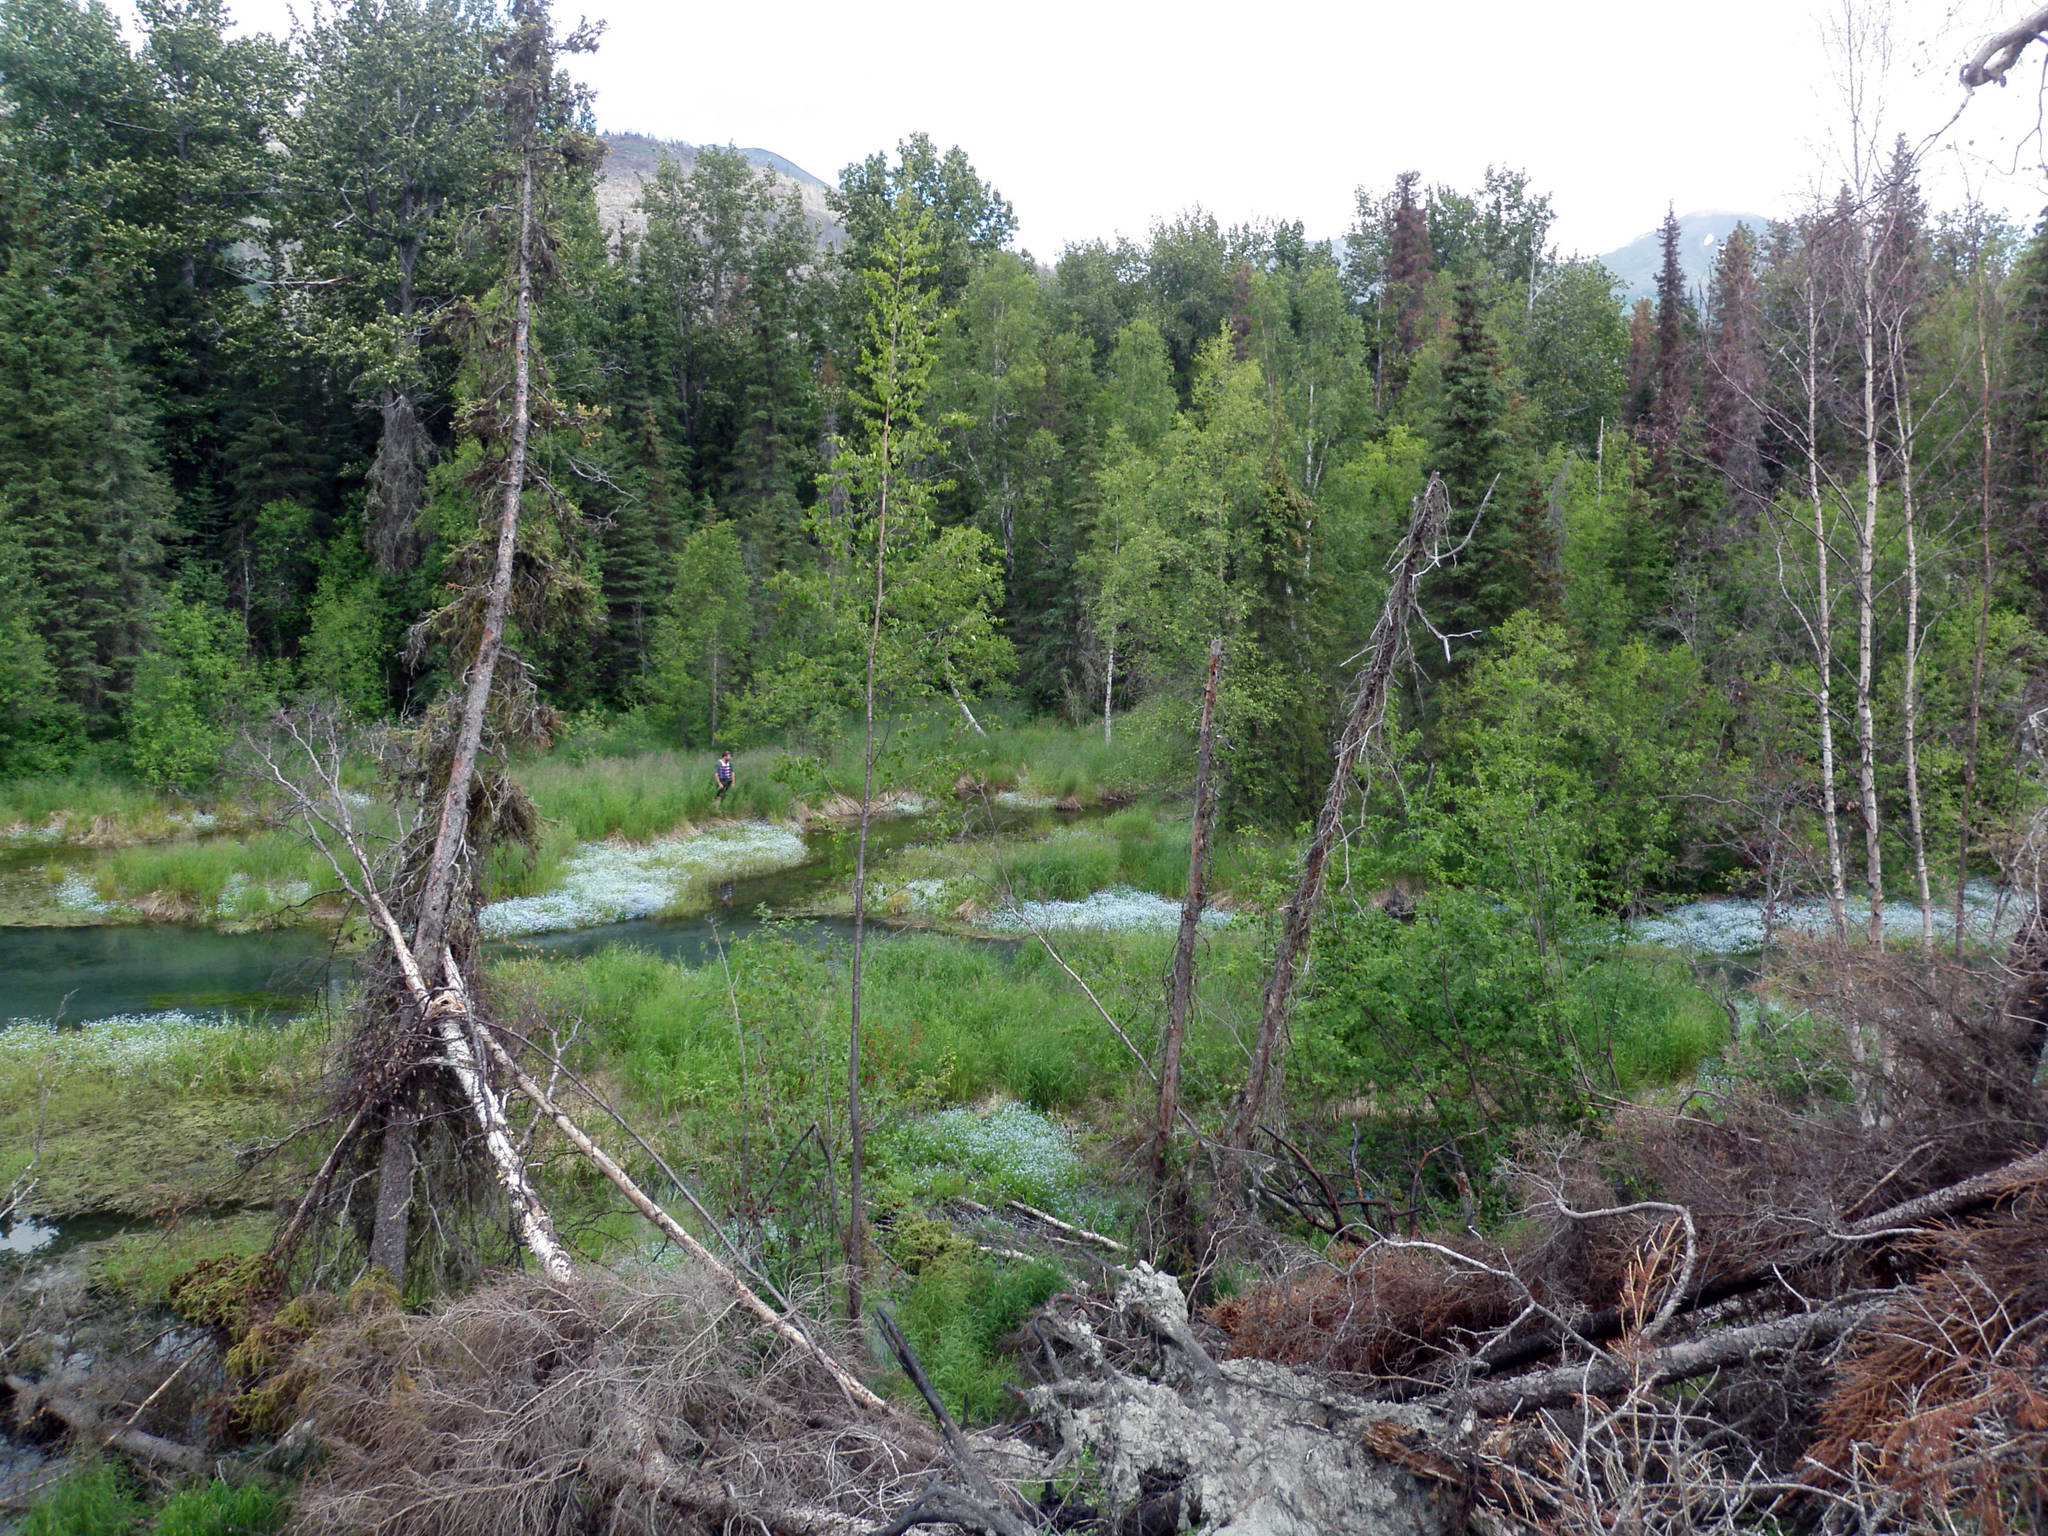 The Kenai River near Surprise Creek on July 7, 2020, which has the largest known infestation of water forget-me-nots in Alaska. All of the pale patches along the water are water forget-me-nots. (Photo courtesy Alaska Center for Conservation Science)